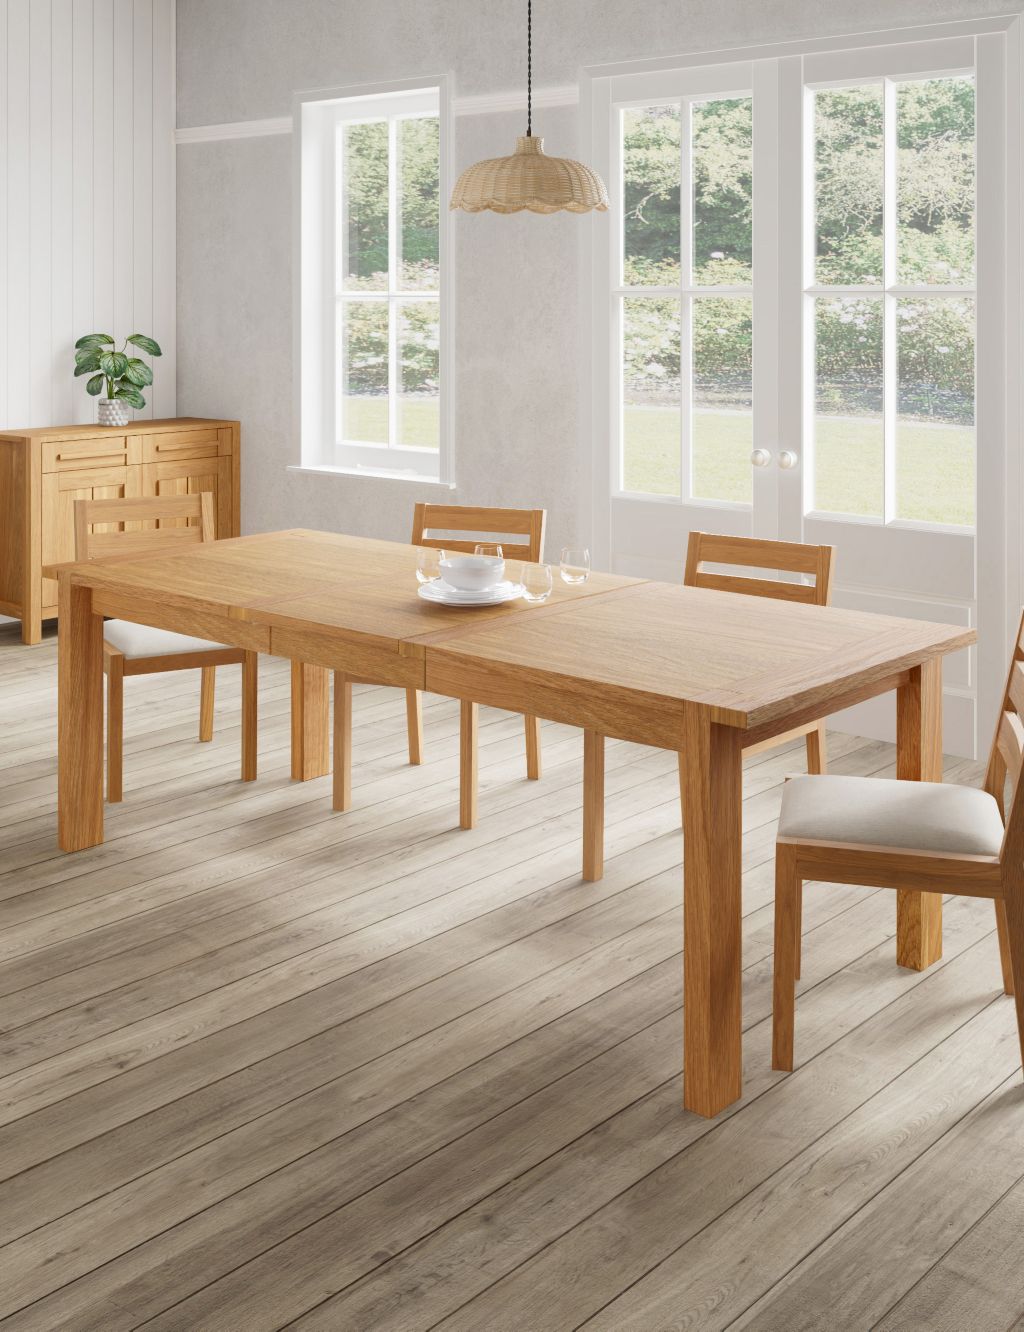 Sonoma™ 8-10 Seater Extending Dining Table image 1